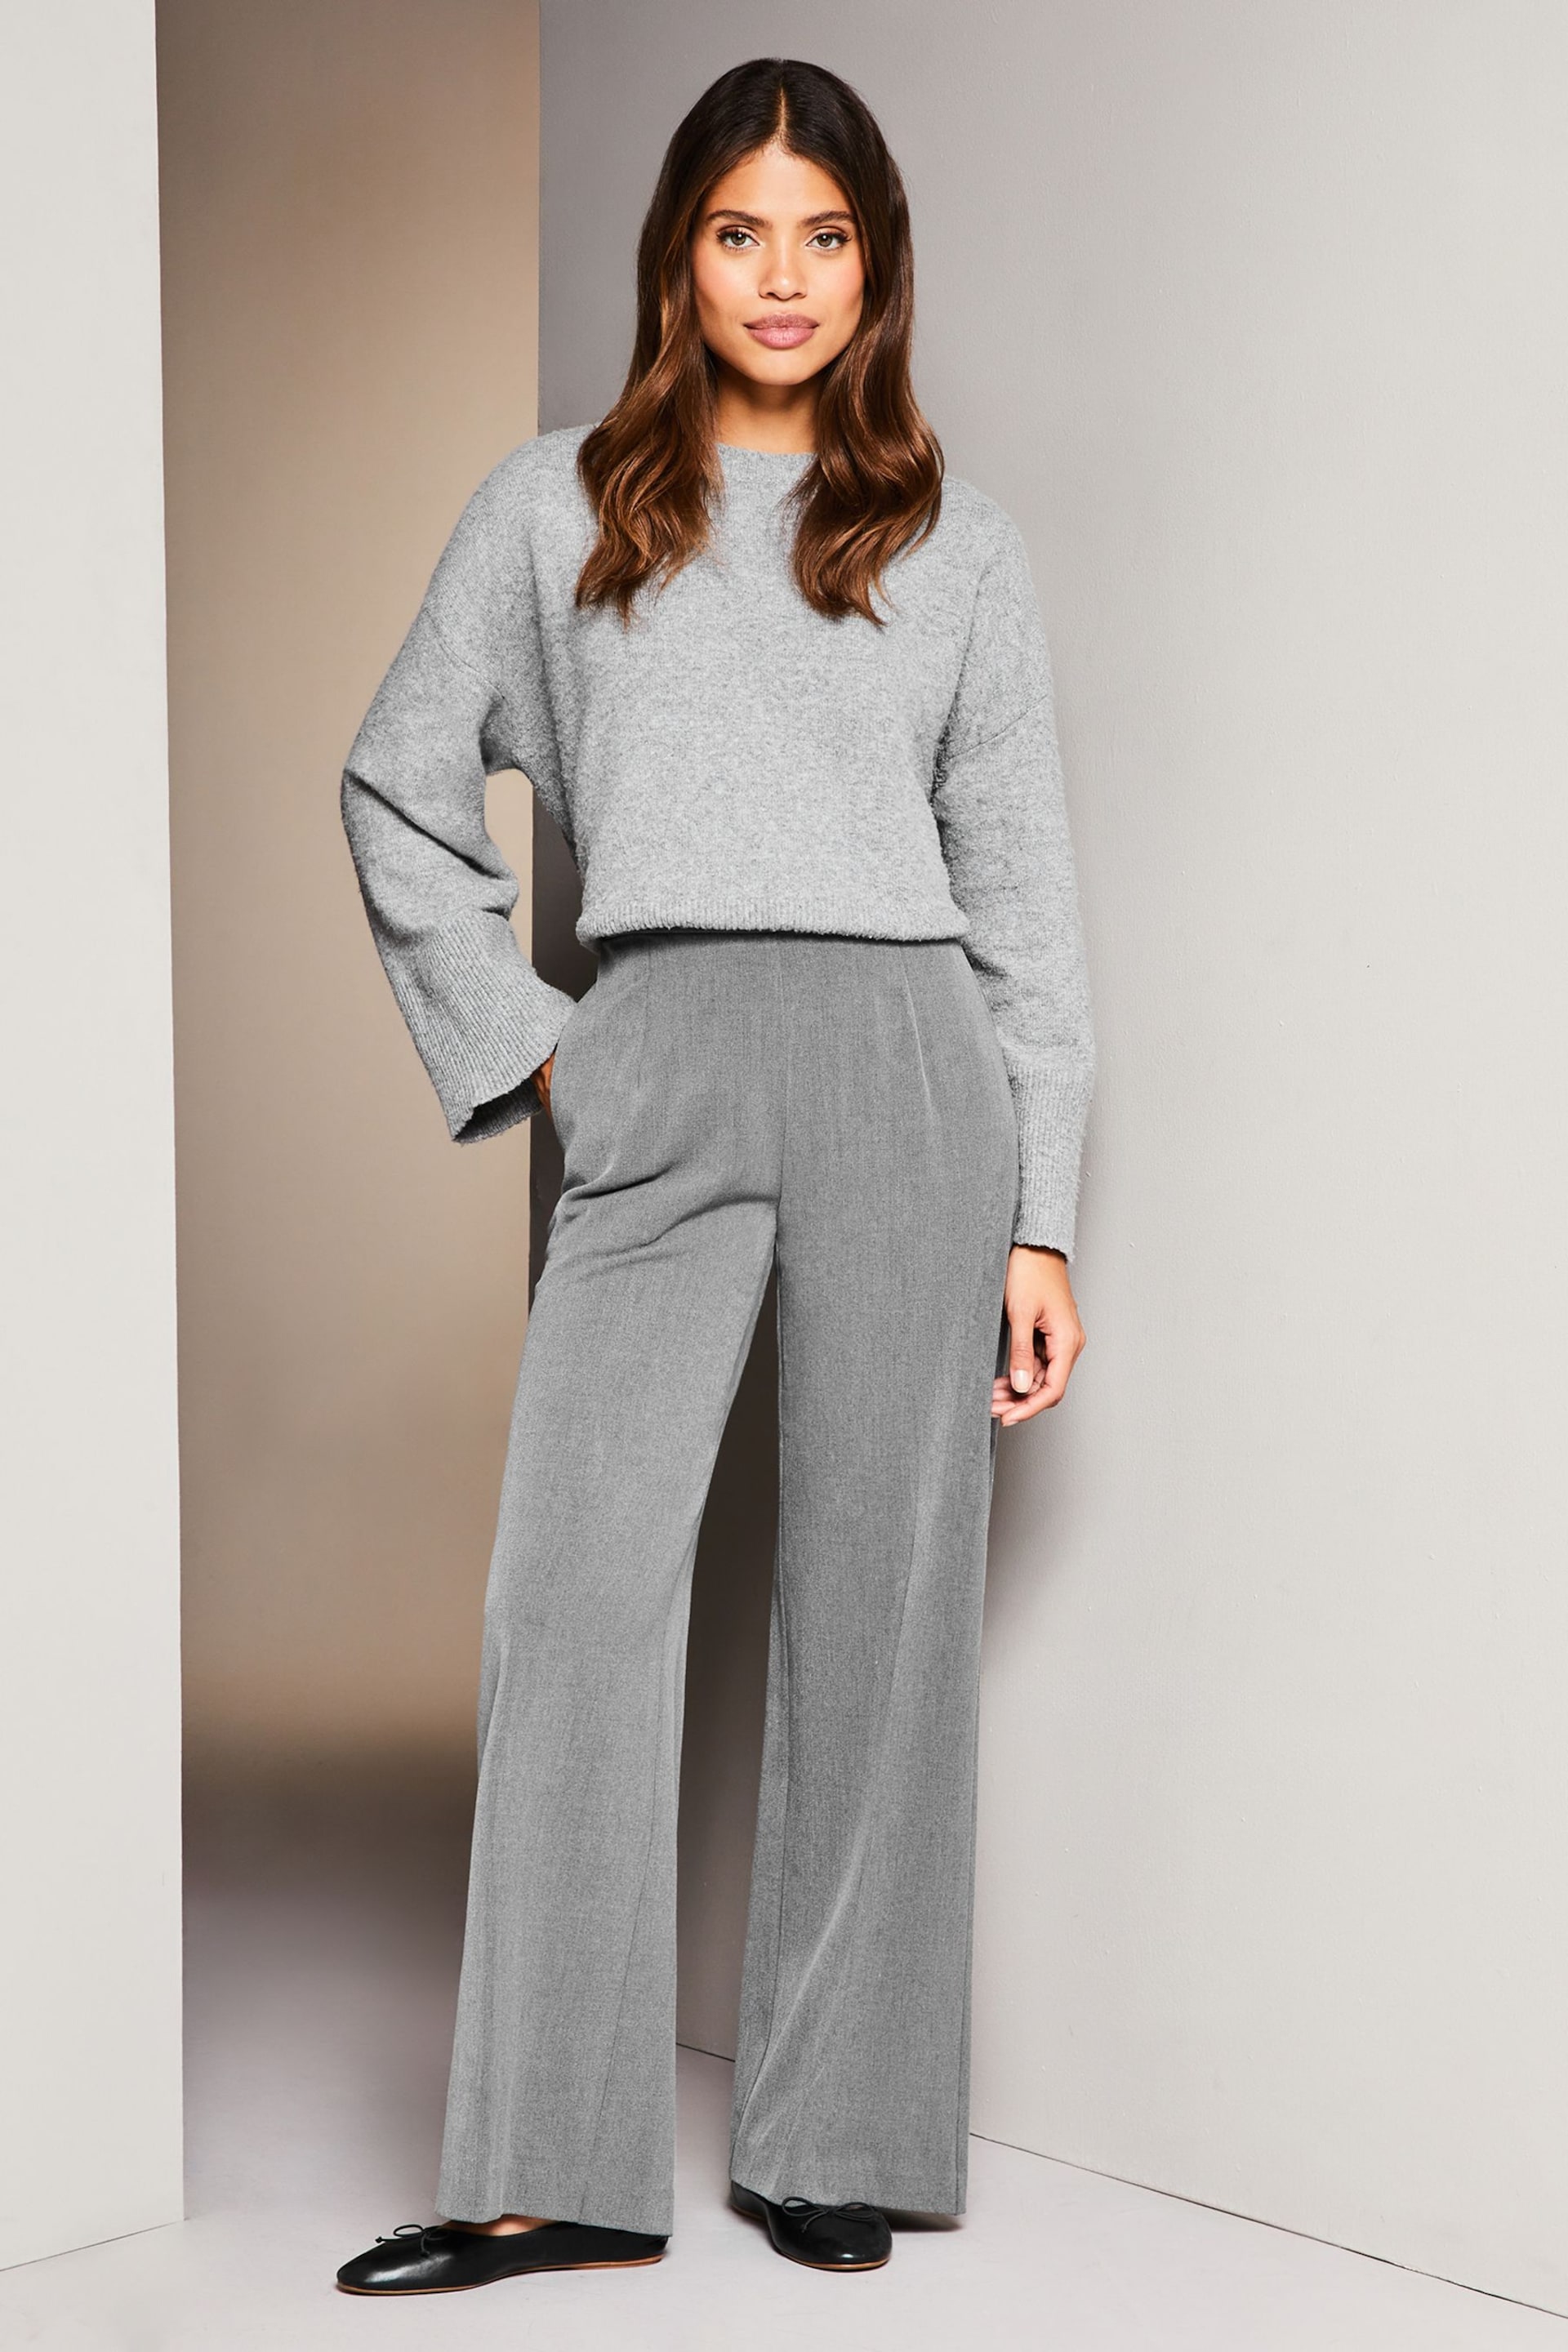 Lipsy Grey Wide Leg Tailored Trousers - Image 3 of 4